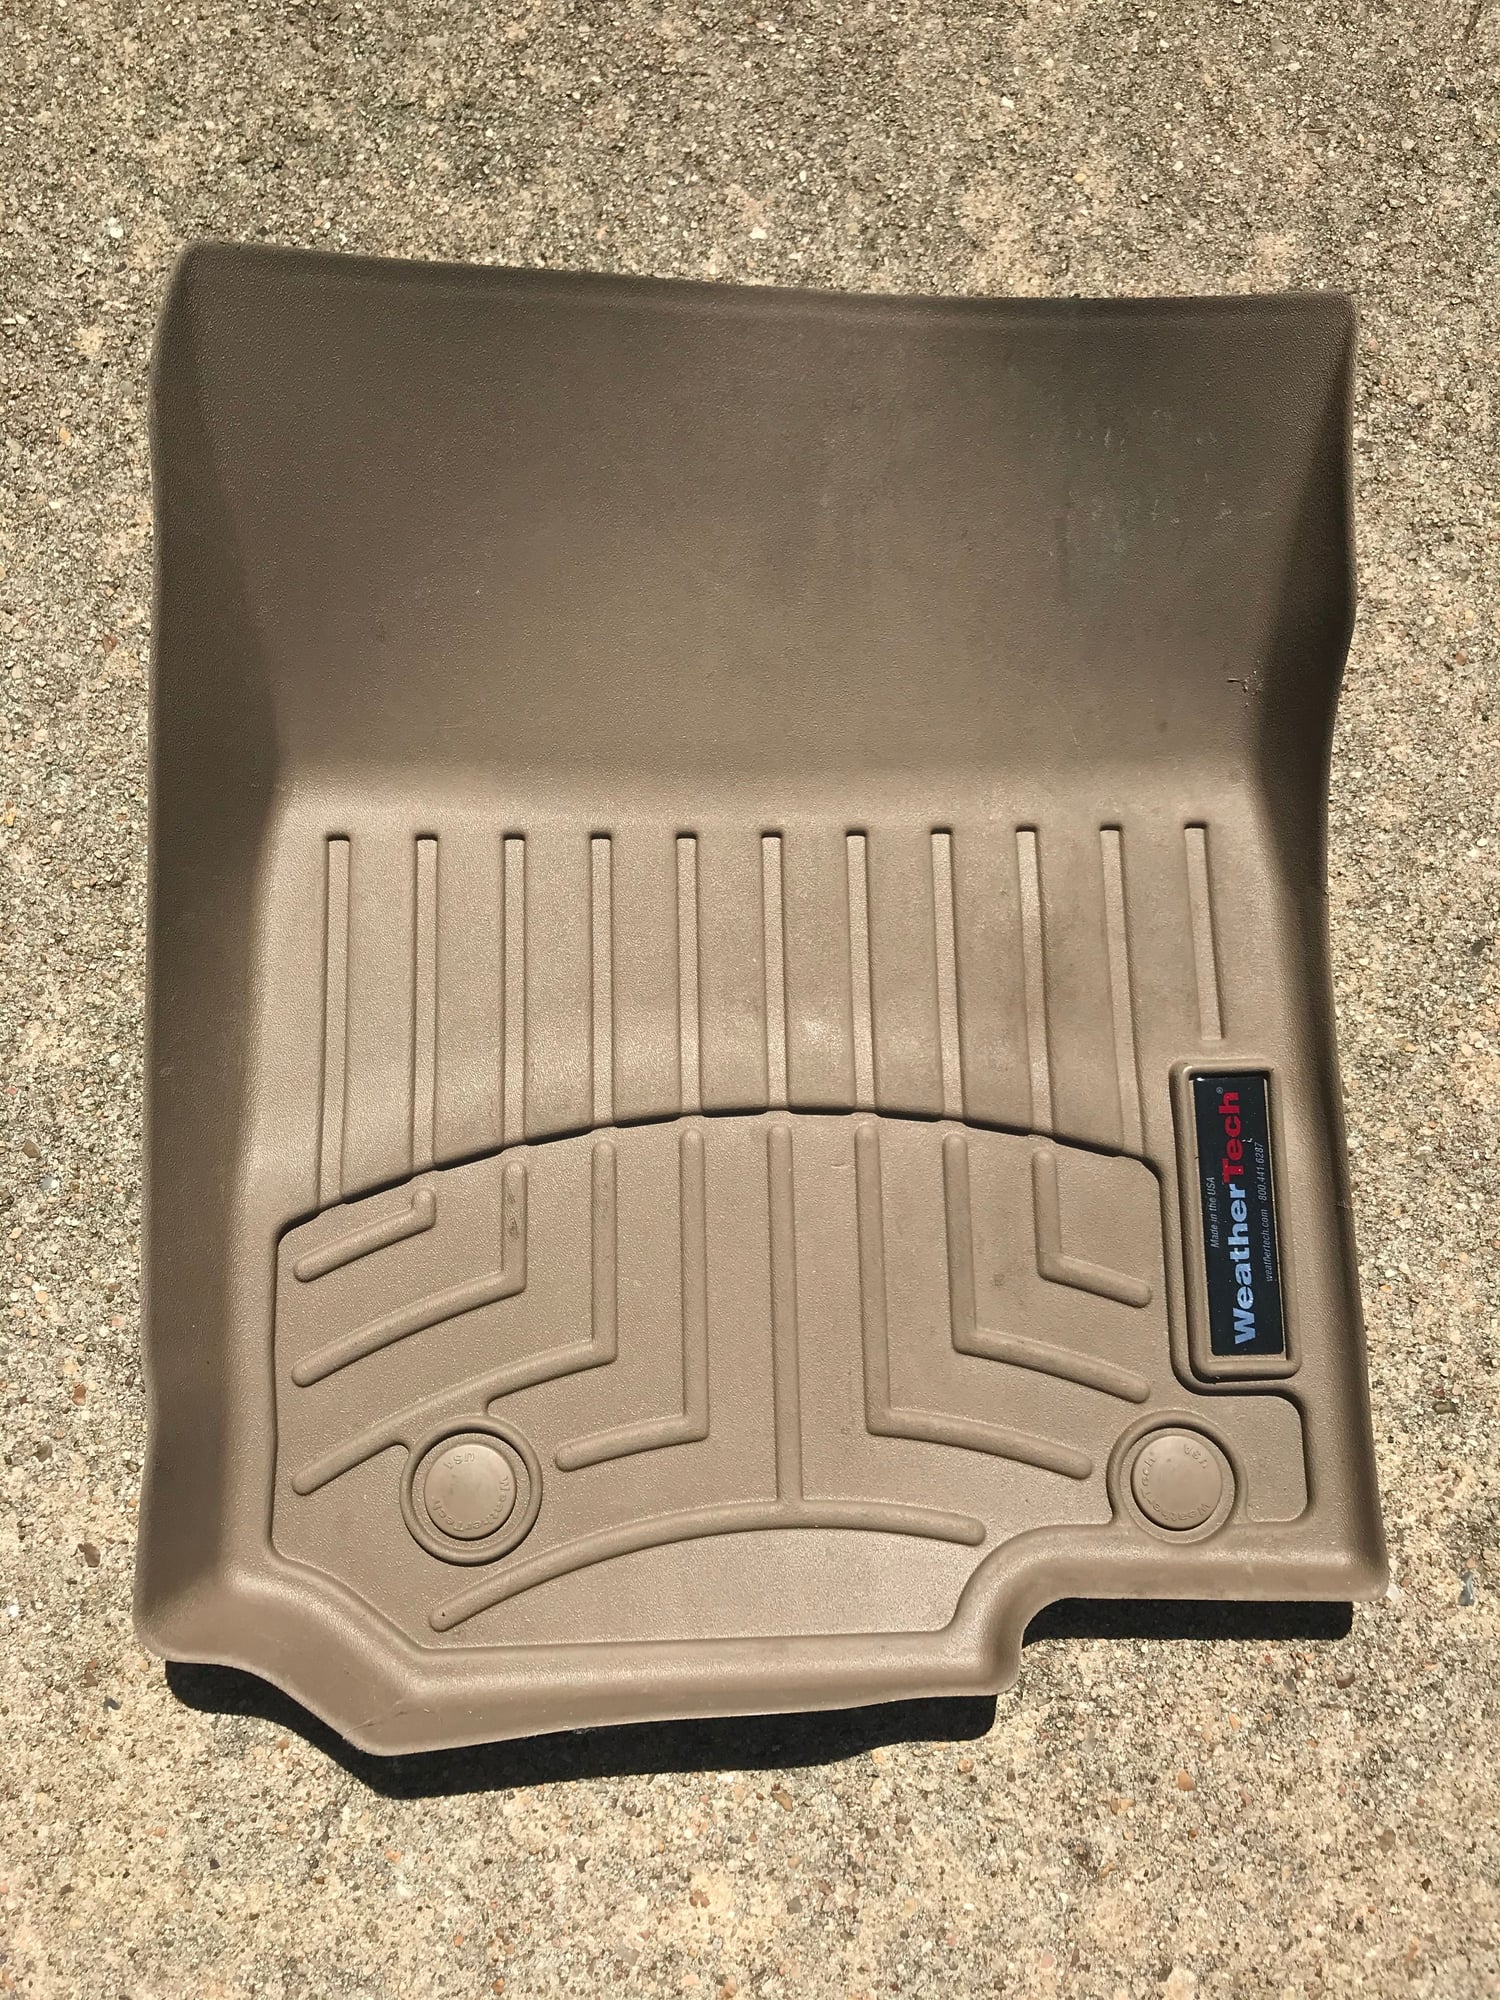 Interior/Upholstery - Weathertech liners for Mercedes GL & GLS class - Used - 2013 to 2019 Mercedes-Benz GL450 - 2013 to 2019 Mercedes-Benz GL550 - 2013 to 2019 Mercedes-Benz GL350 - Sugar Land, TX 77479, United States